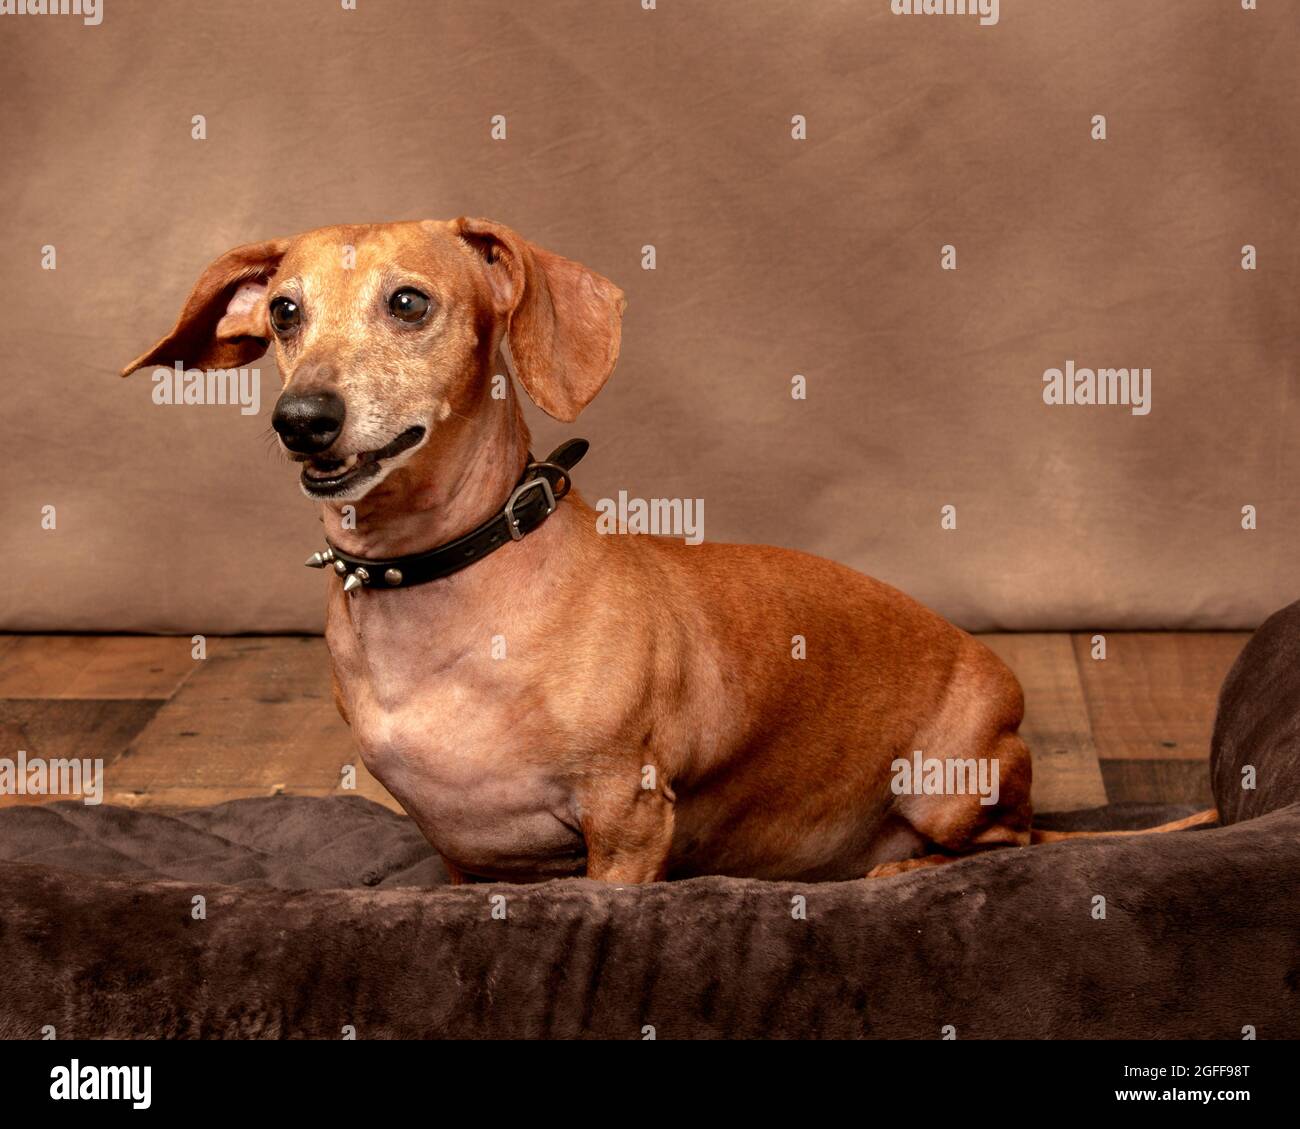 Horizontal shot of a happy red dachshund with copyspace.  Wood like floor and brown textured background. Stock Photo